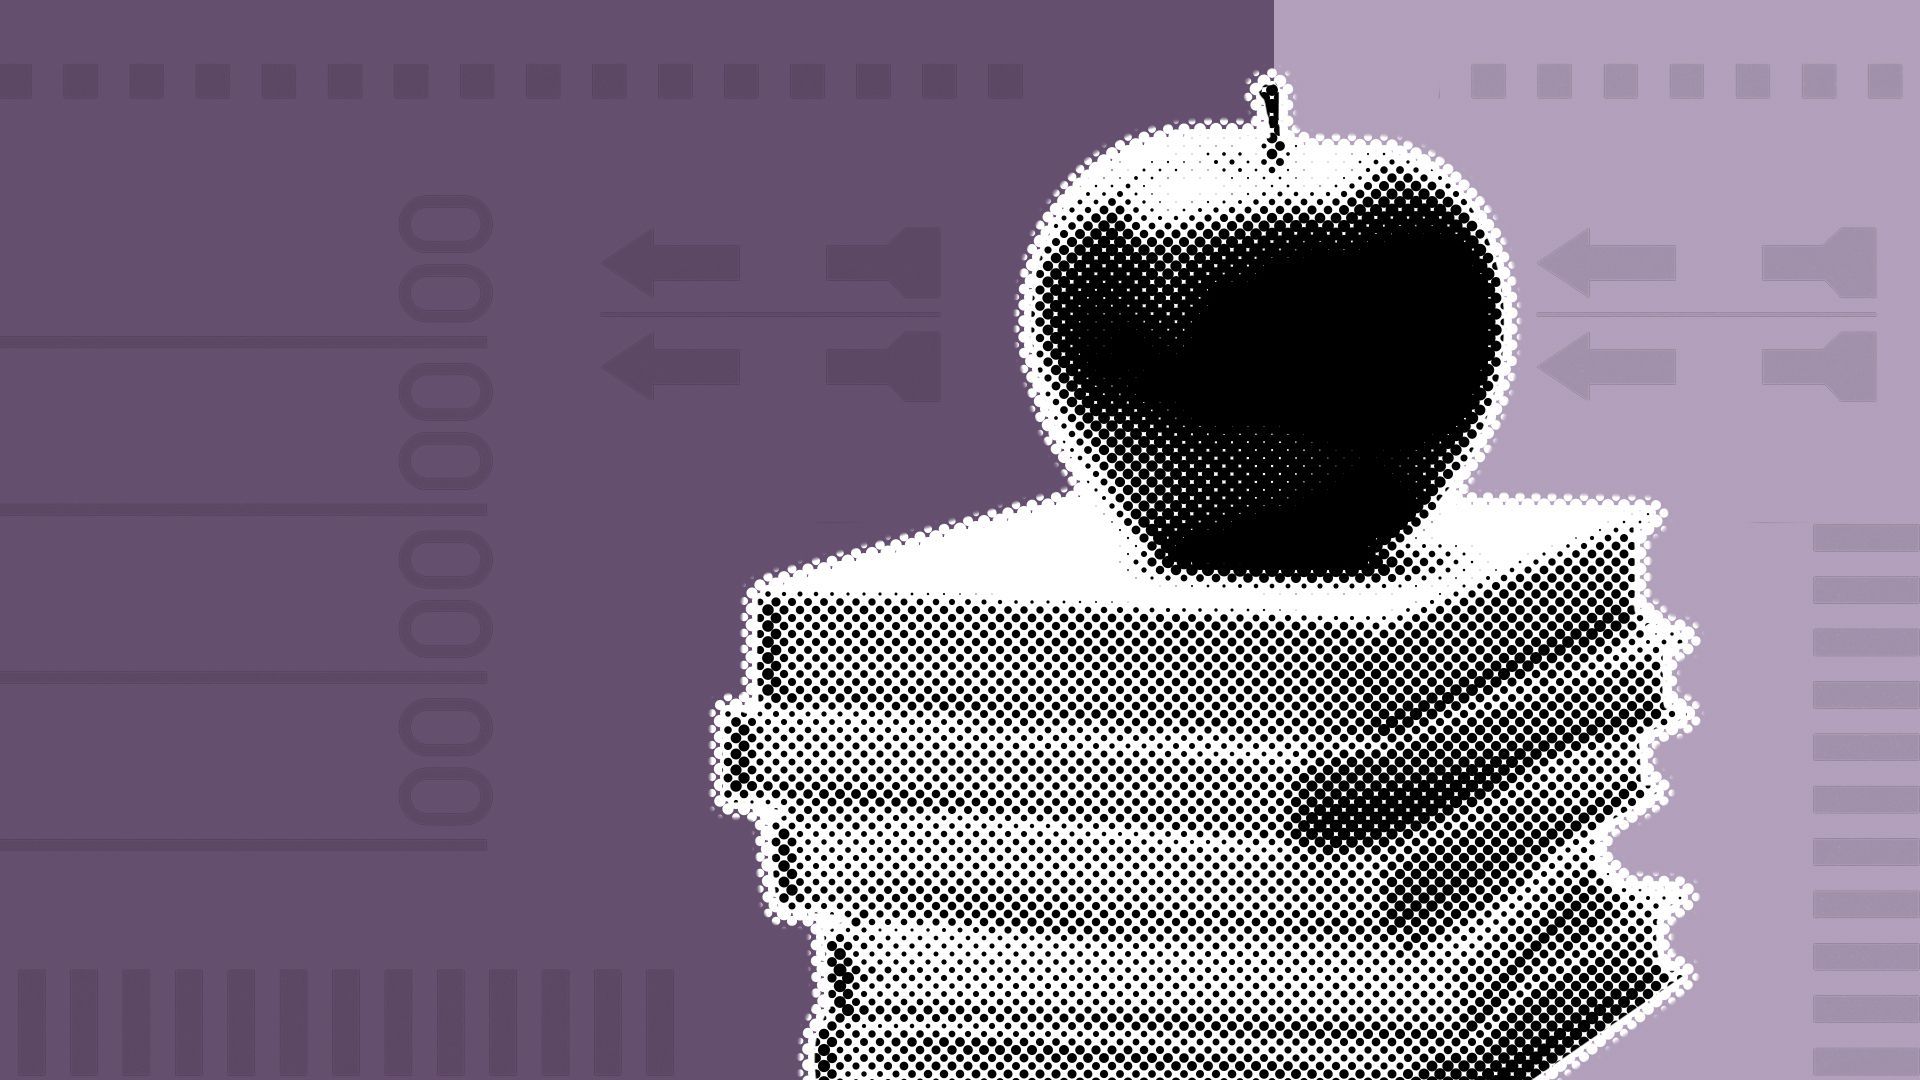 Illustration of a stack of books with an apple sitting on top of them with ballot imagery and shapes behind it